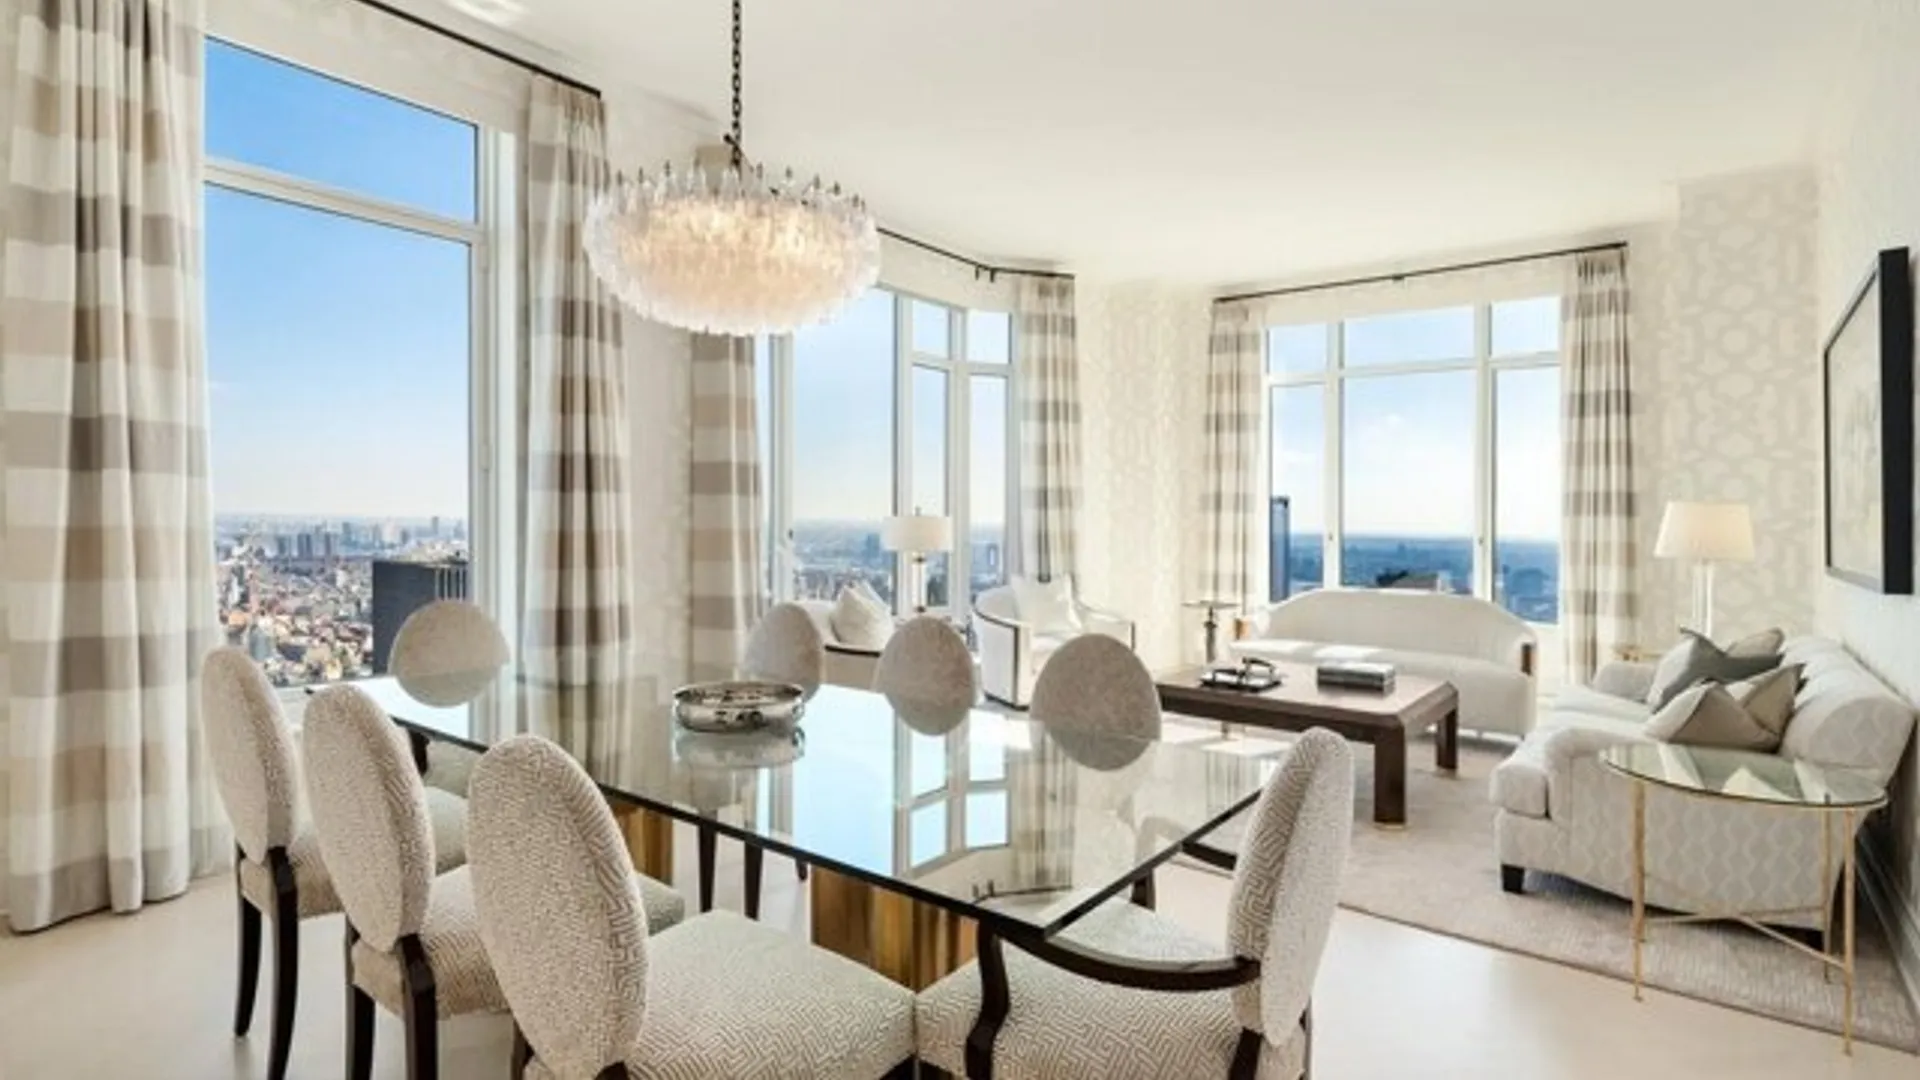 Four Seasons New York Downtown Hotel & Residences, 30 Park Place, New York, NY 10007, USA | 3 bed apartment for rent